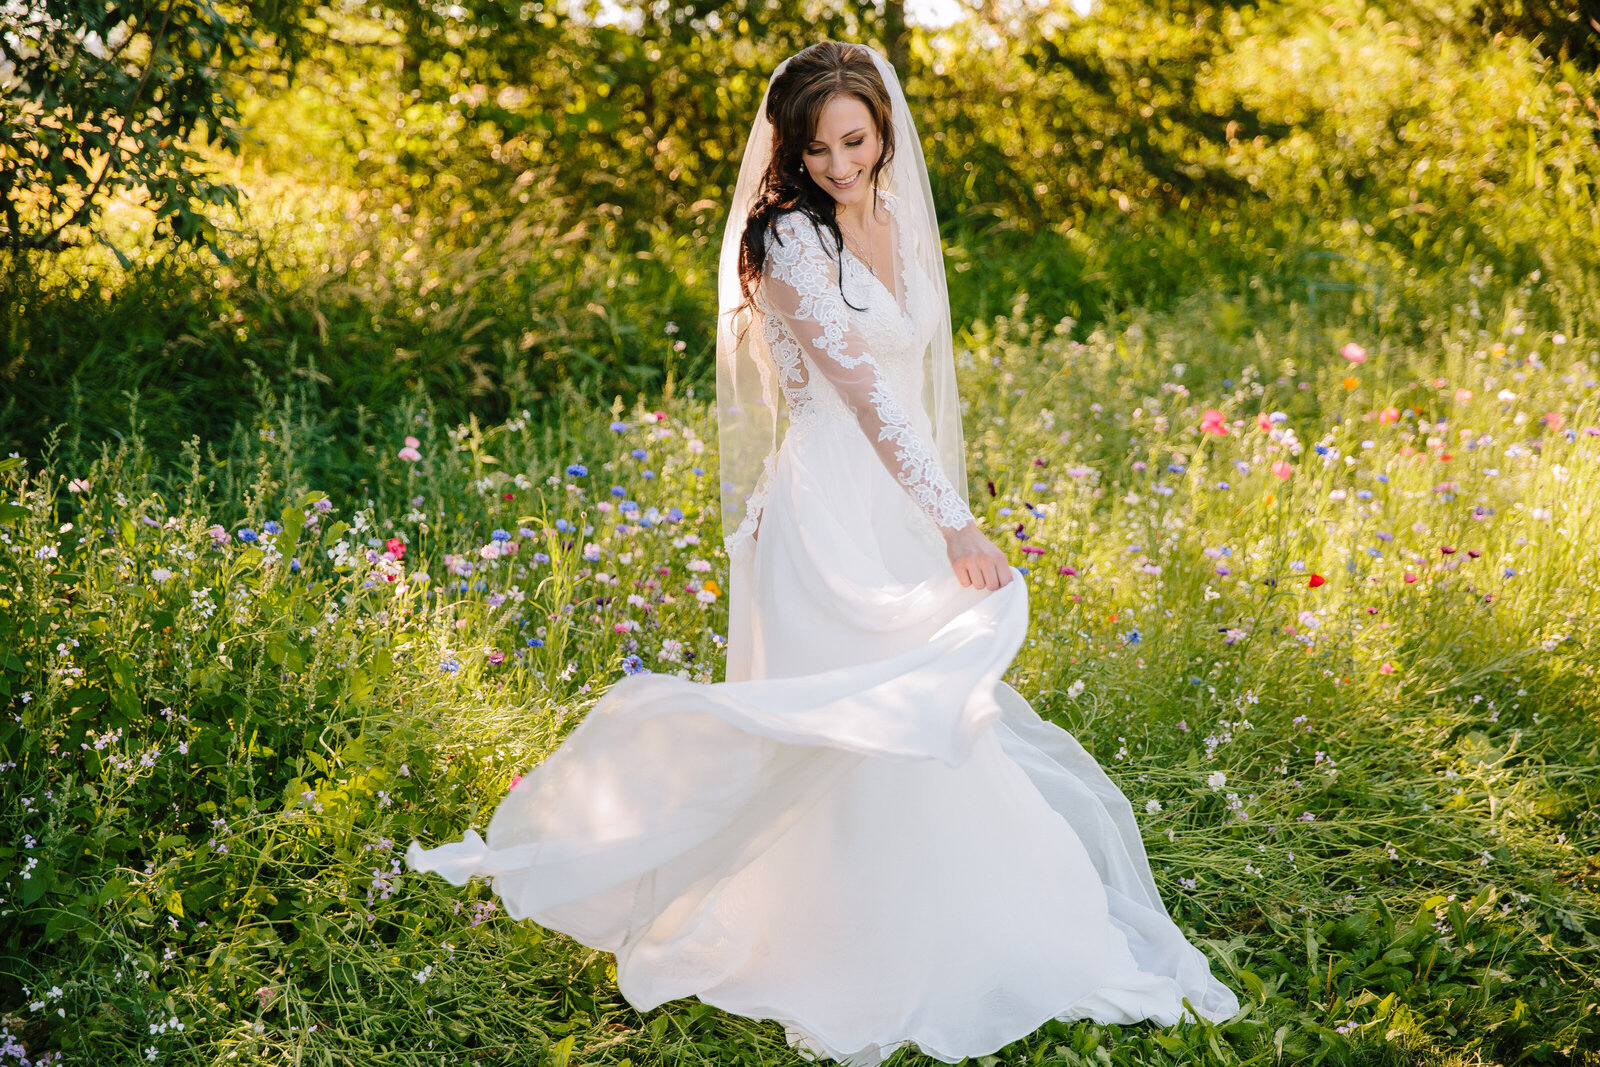 Jackson Hole photographers capture bride swinging gown during waterfall bridals